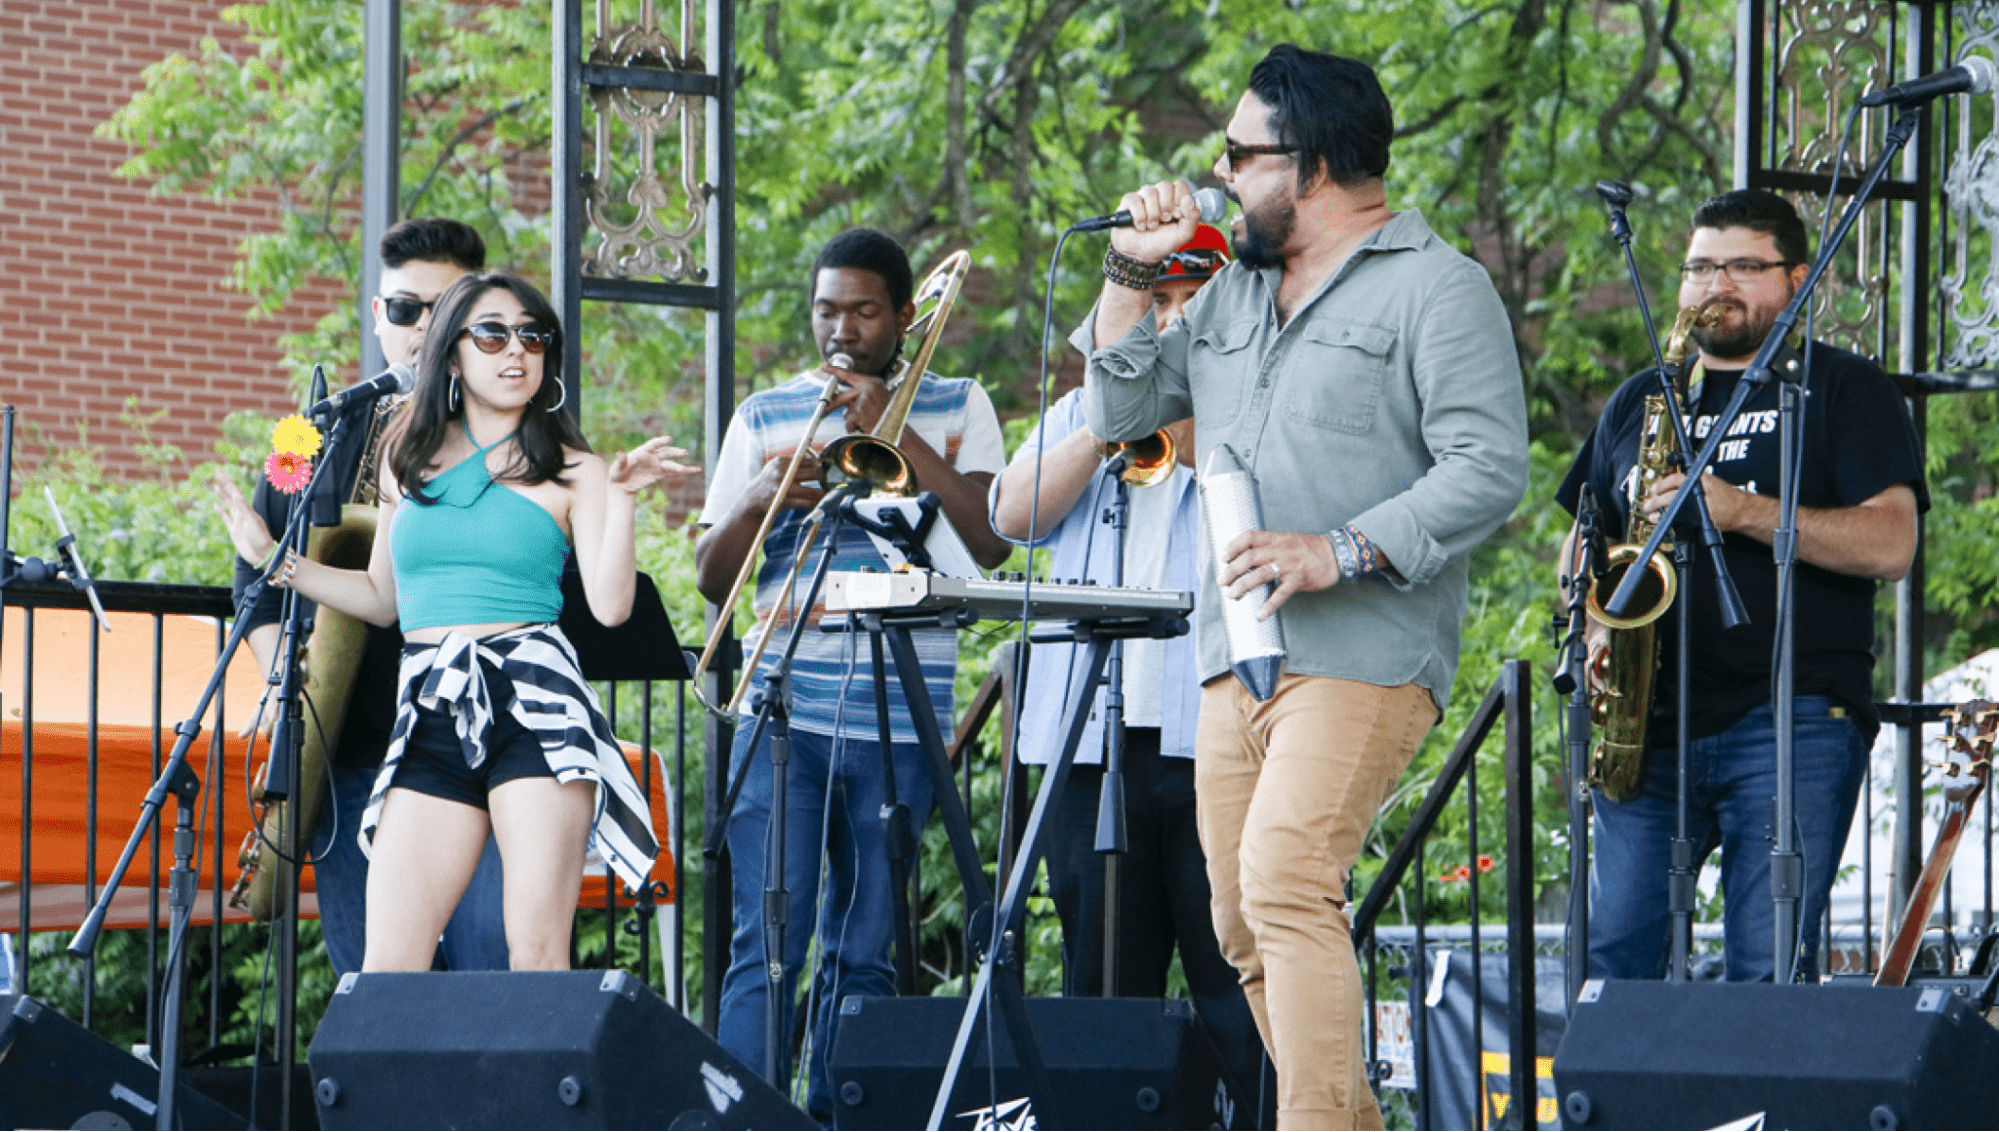 A band performing at a music festival